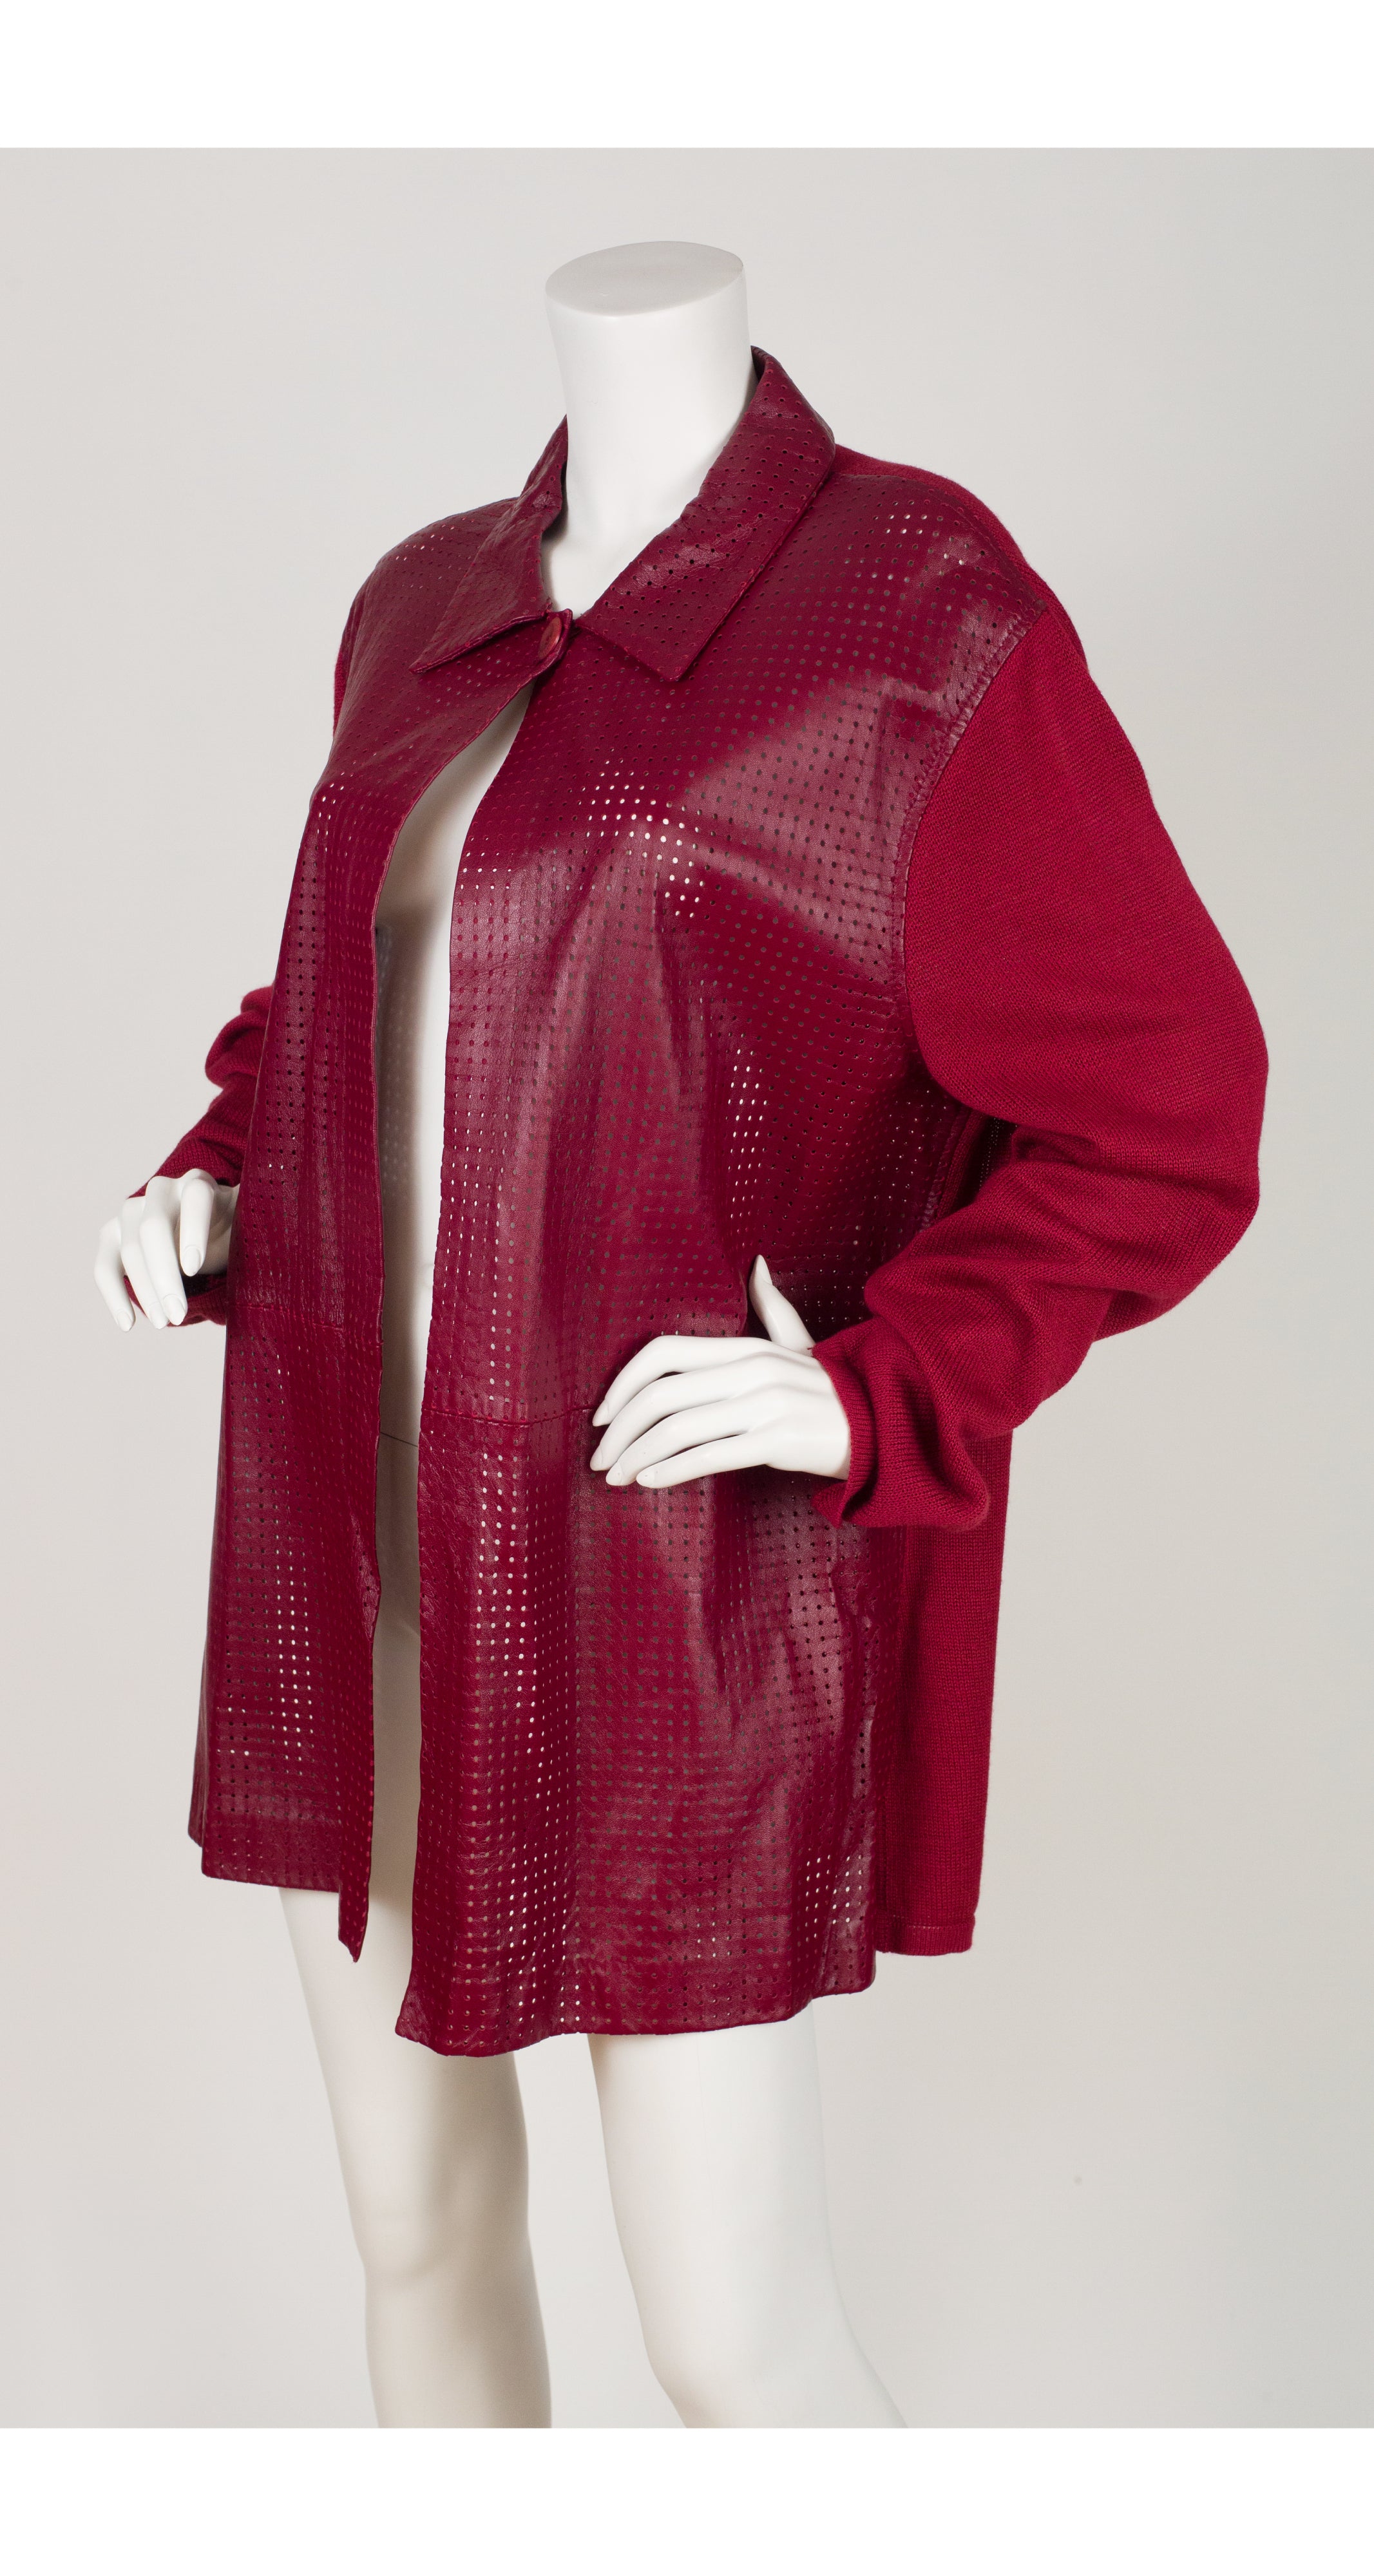 1990s NWT Burgundy Perforated Lambskin & Cotton Knit Jacket